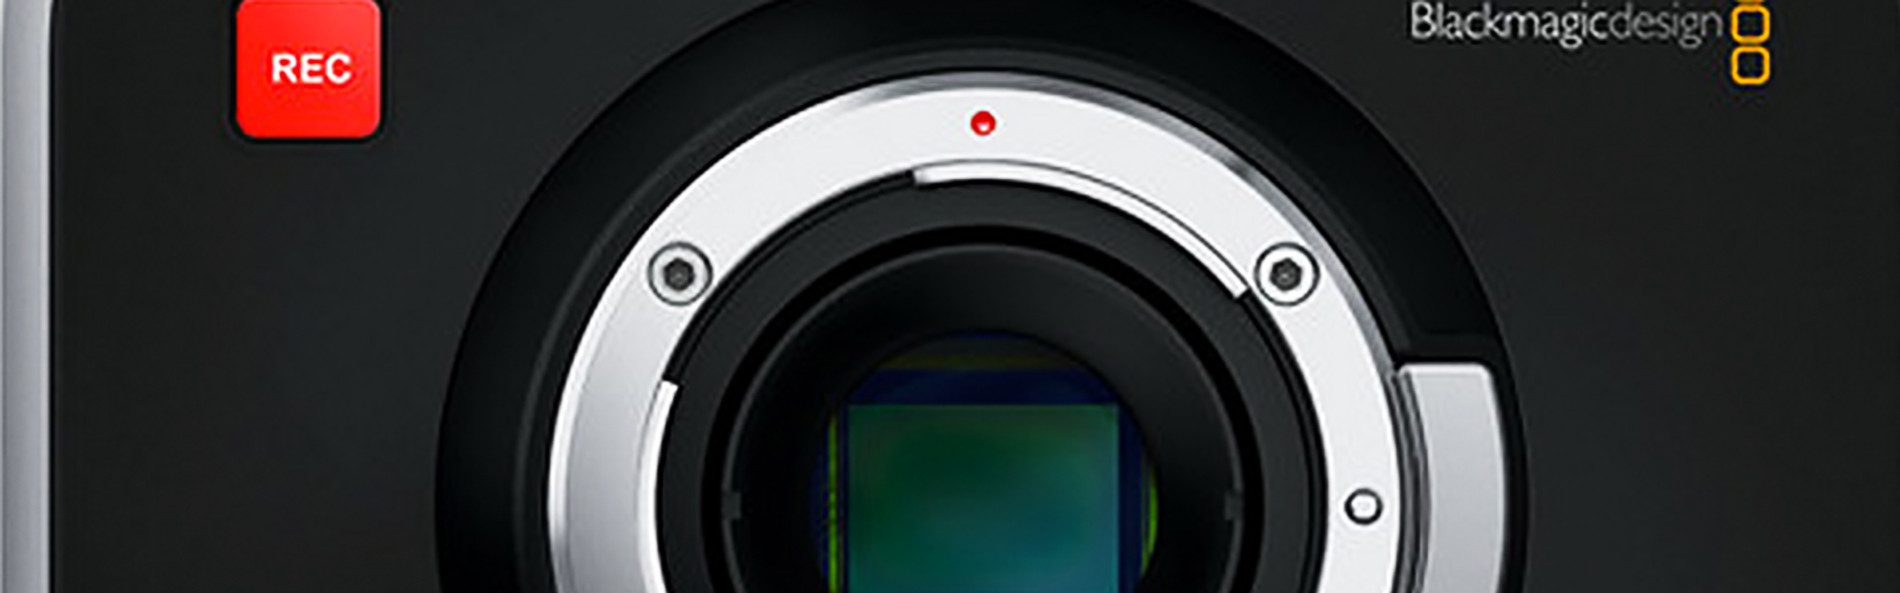 Header image for article Lenses and Accessories for the Blackmagic Production Camera 4K